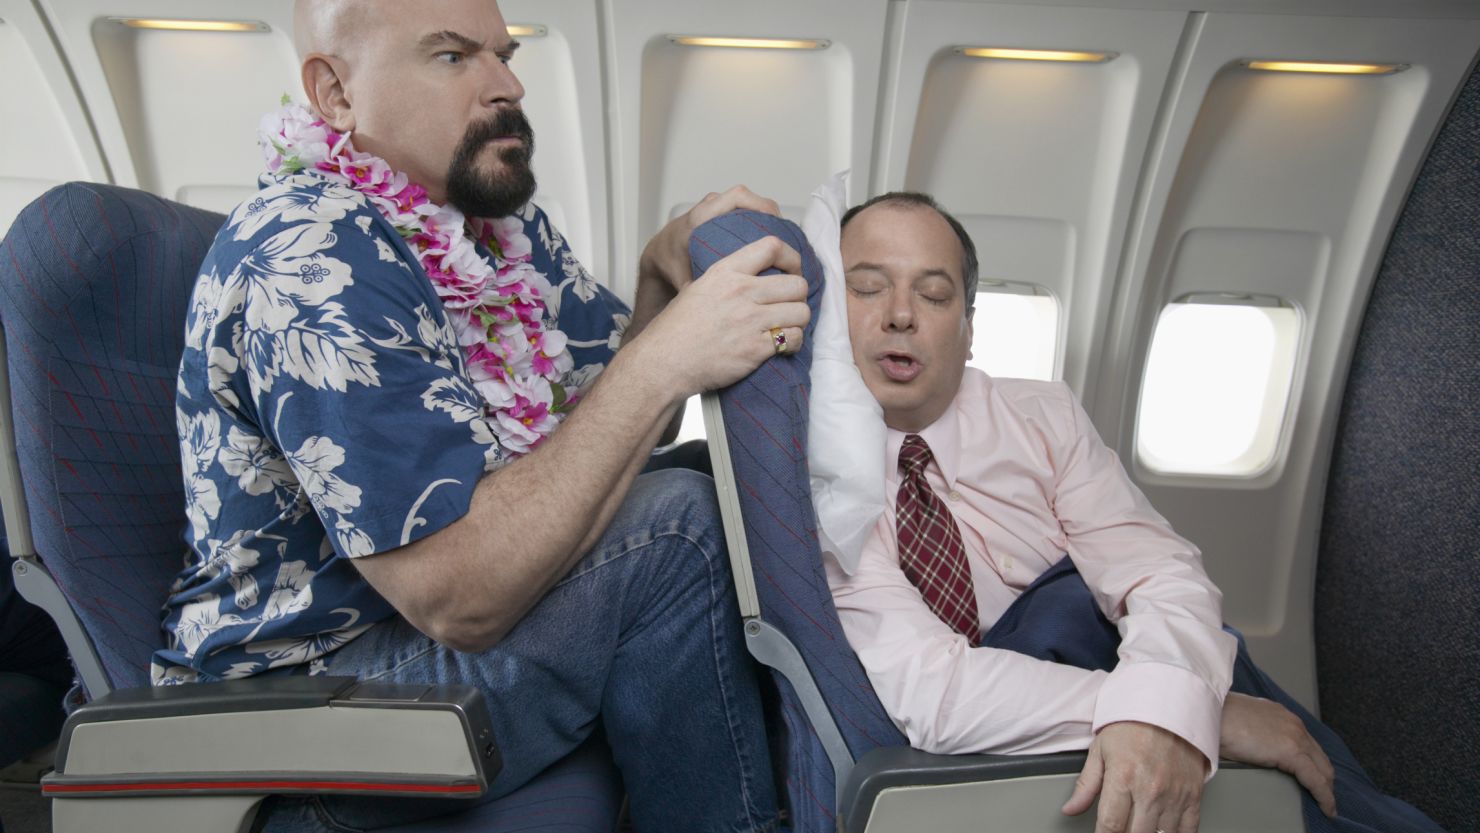 Reclining without regard for fellow passengers creates in-flight tension.